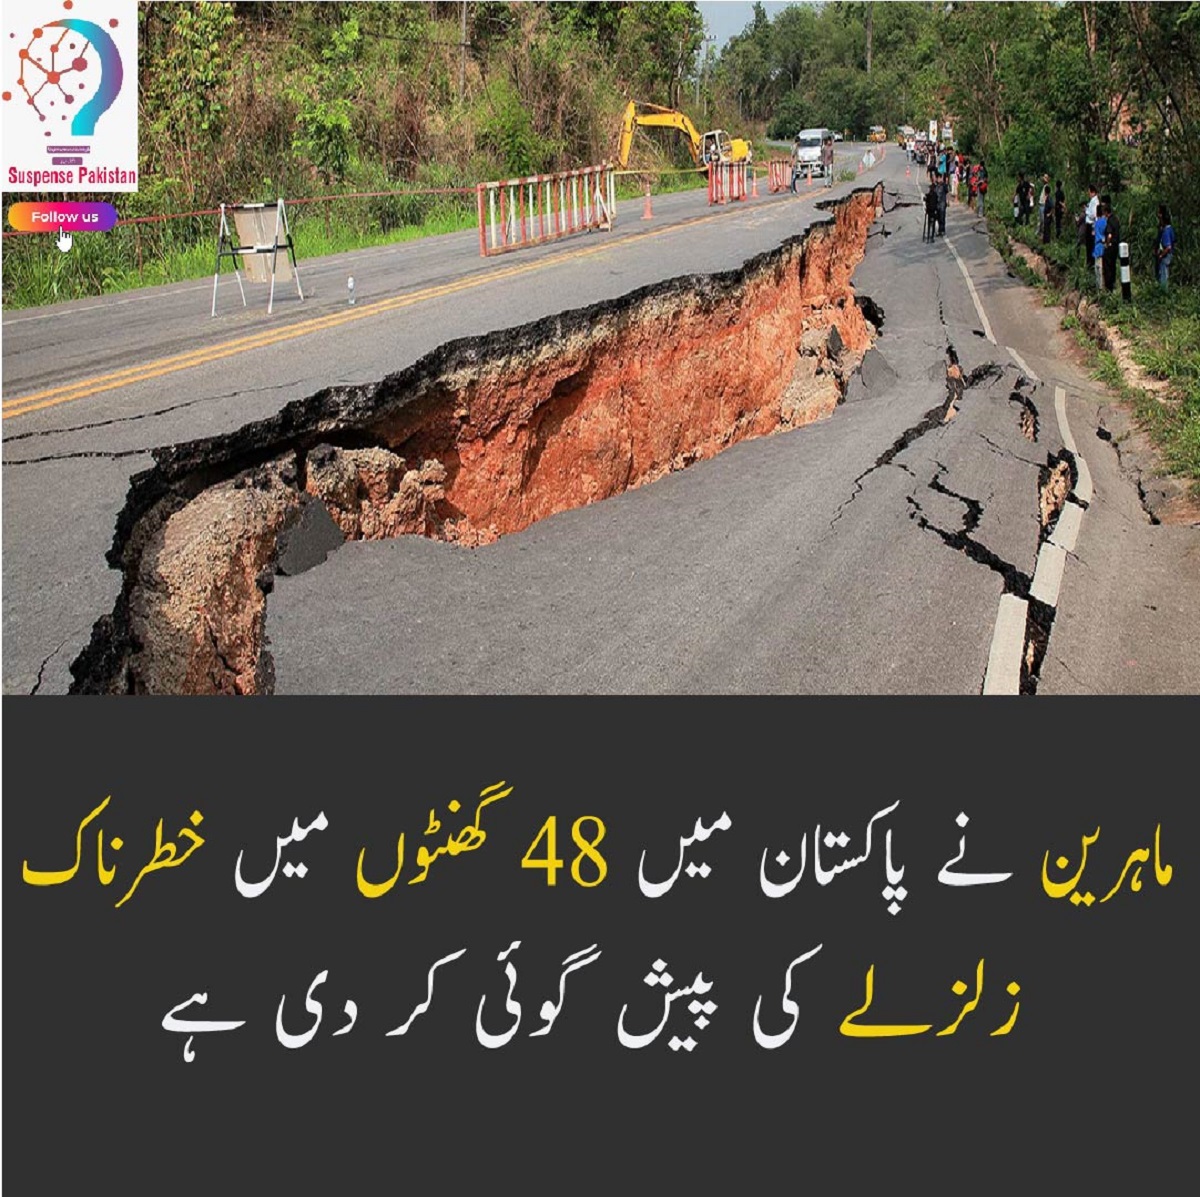 Earthquake alert: Dutch scientist predicts ‘strong tremor’ in Pakistan